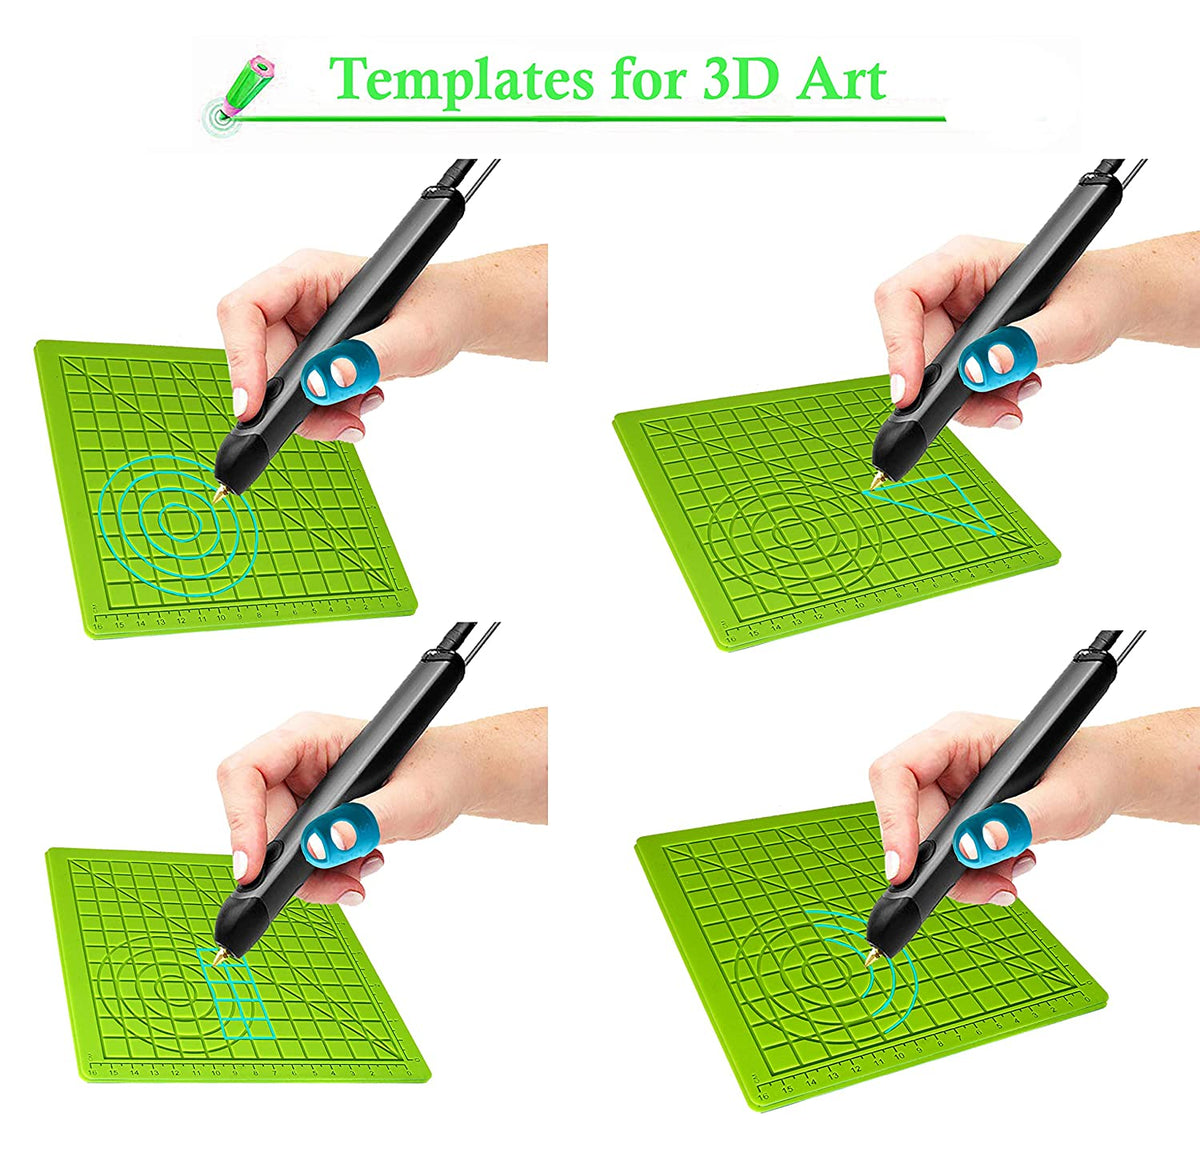 Buy 3D Pen online at best price in India: Free 3D Stencils